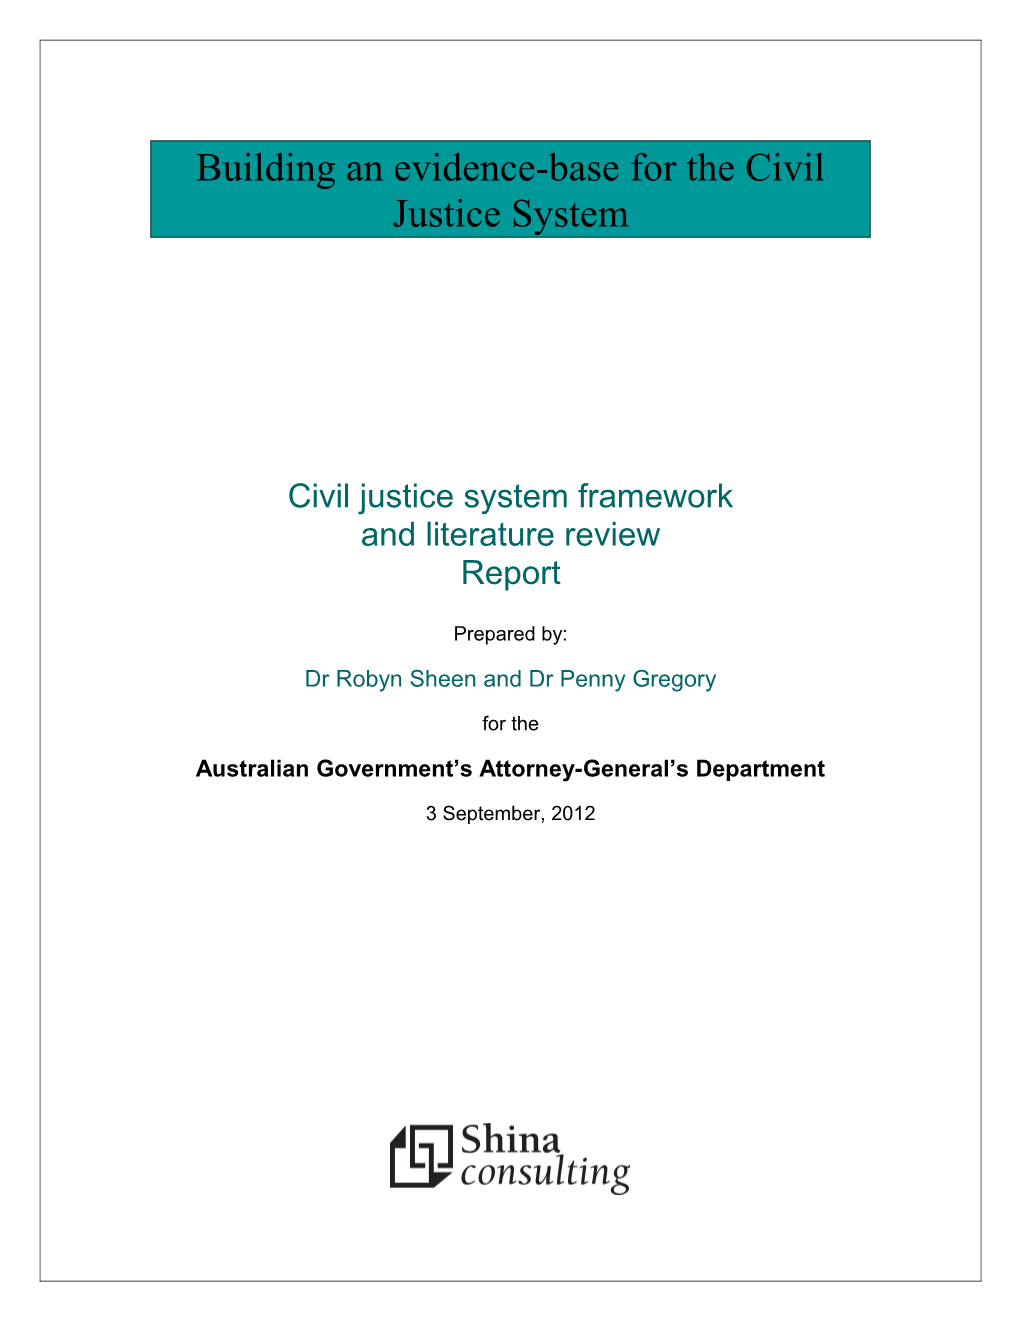 2012 Report Civil Justice System Framework and Literature Review Report Shina Consulting